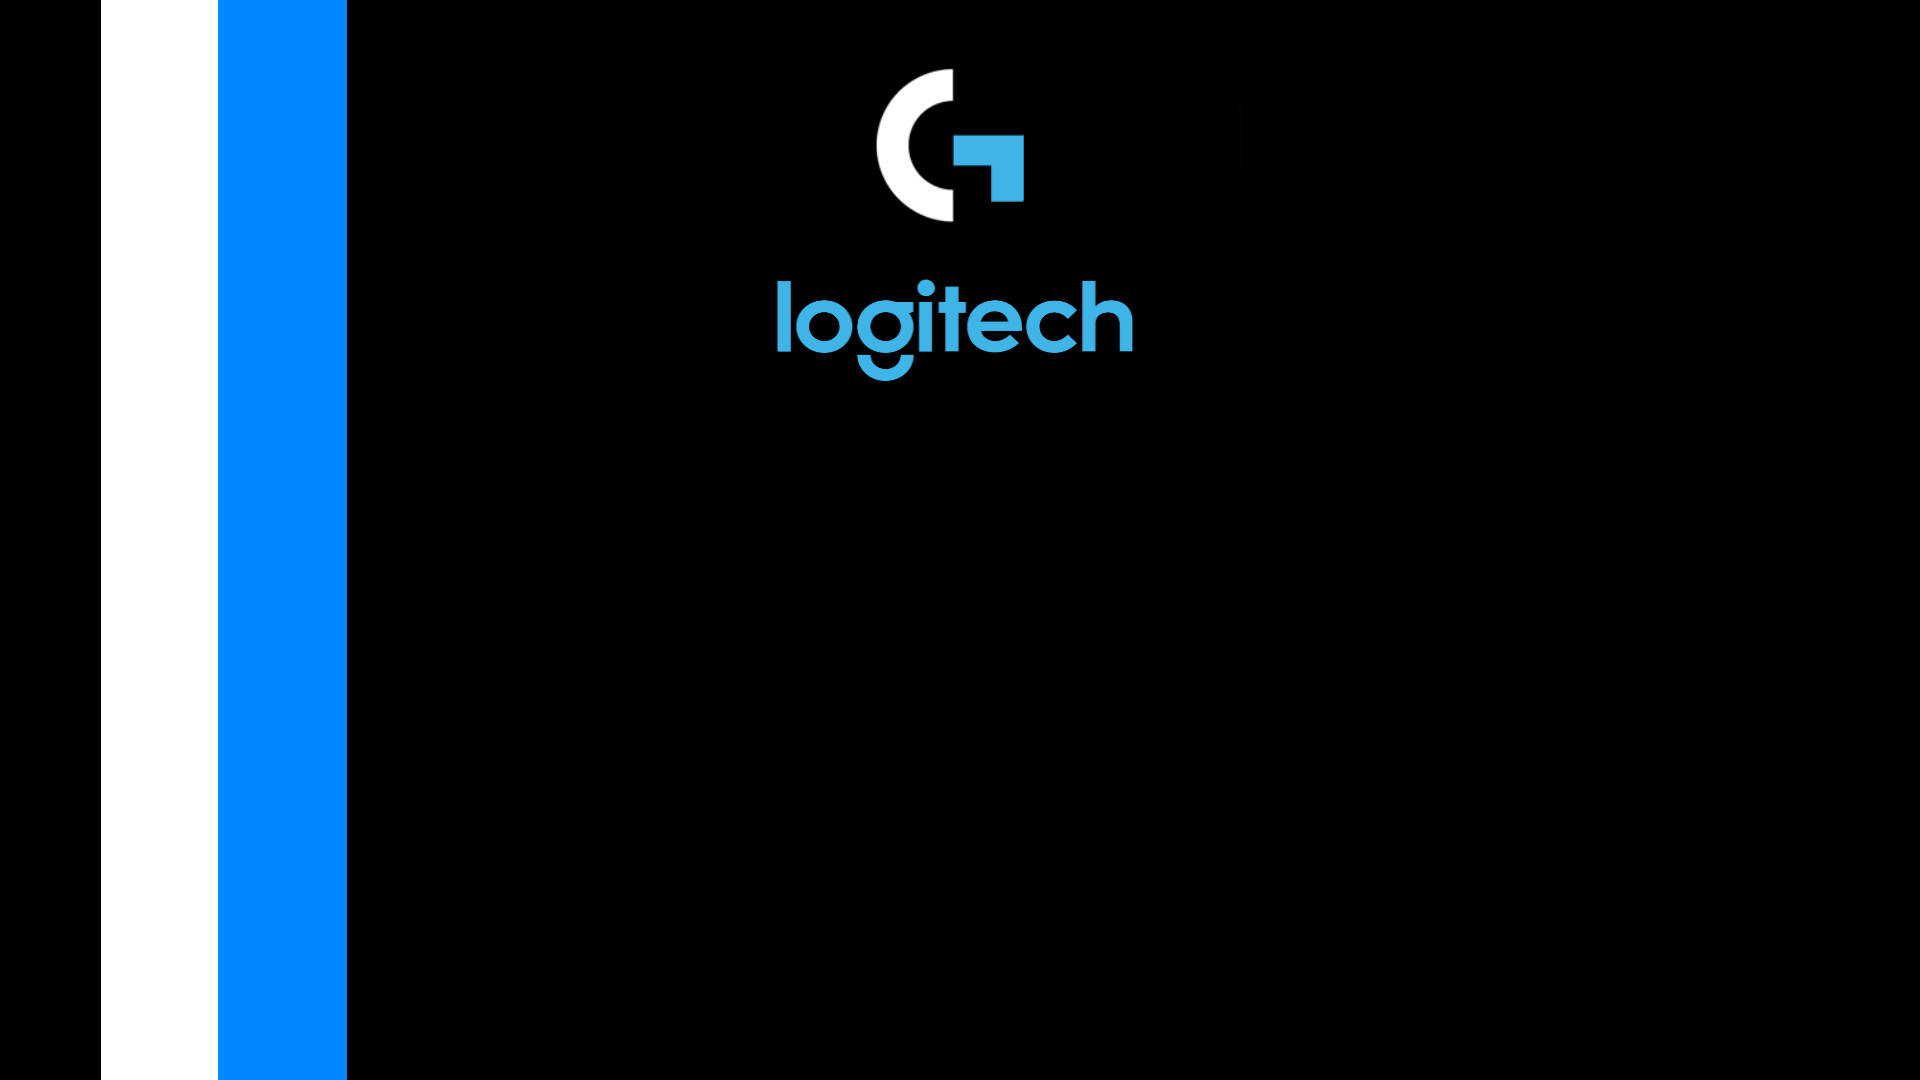 Logitech With Stripes Background